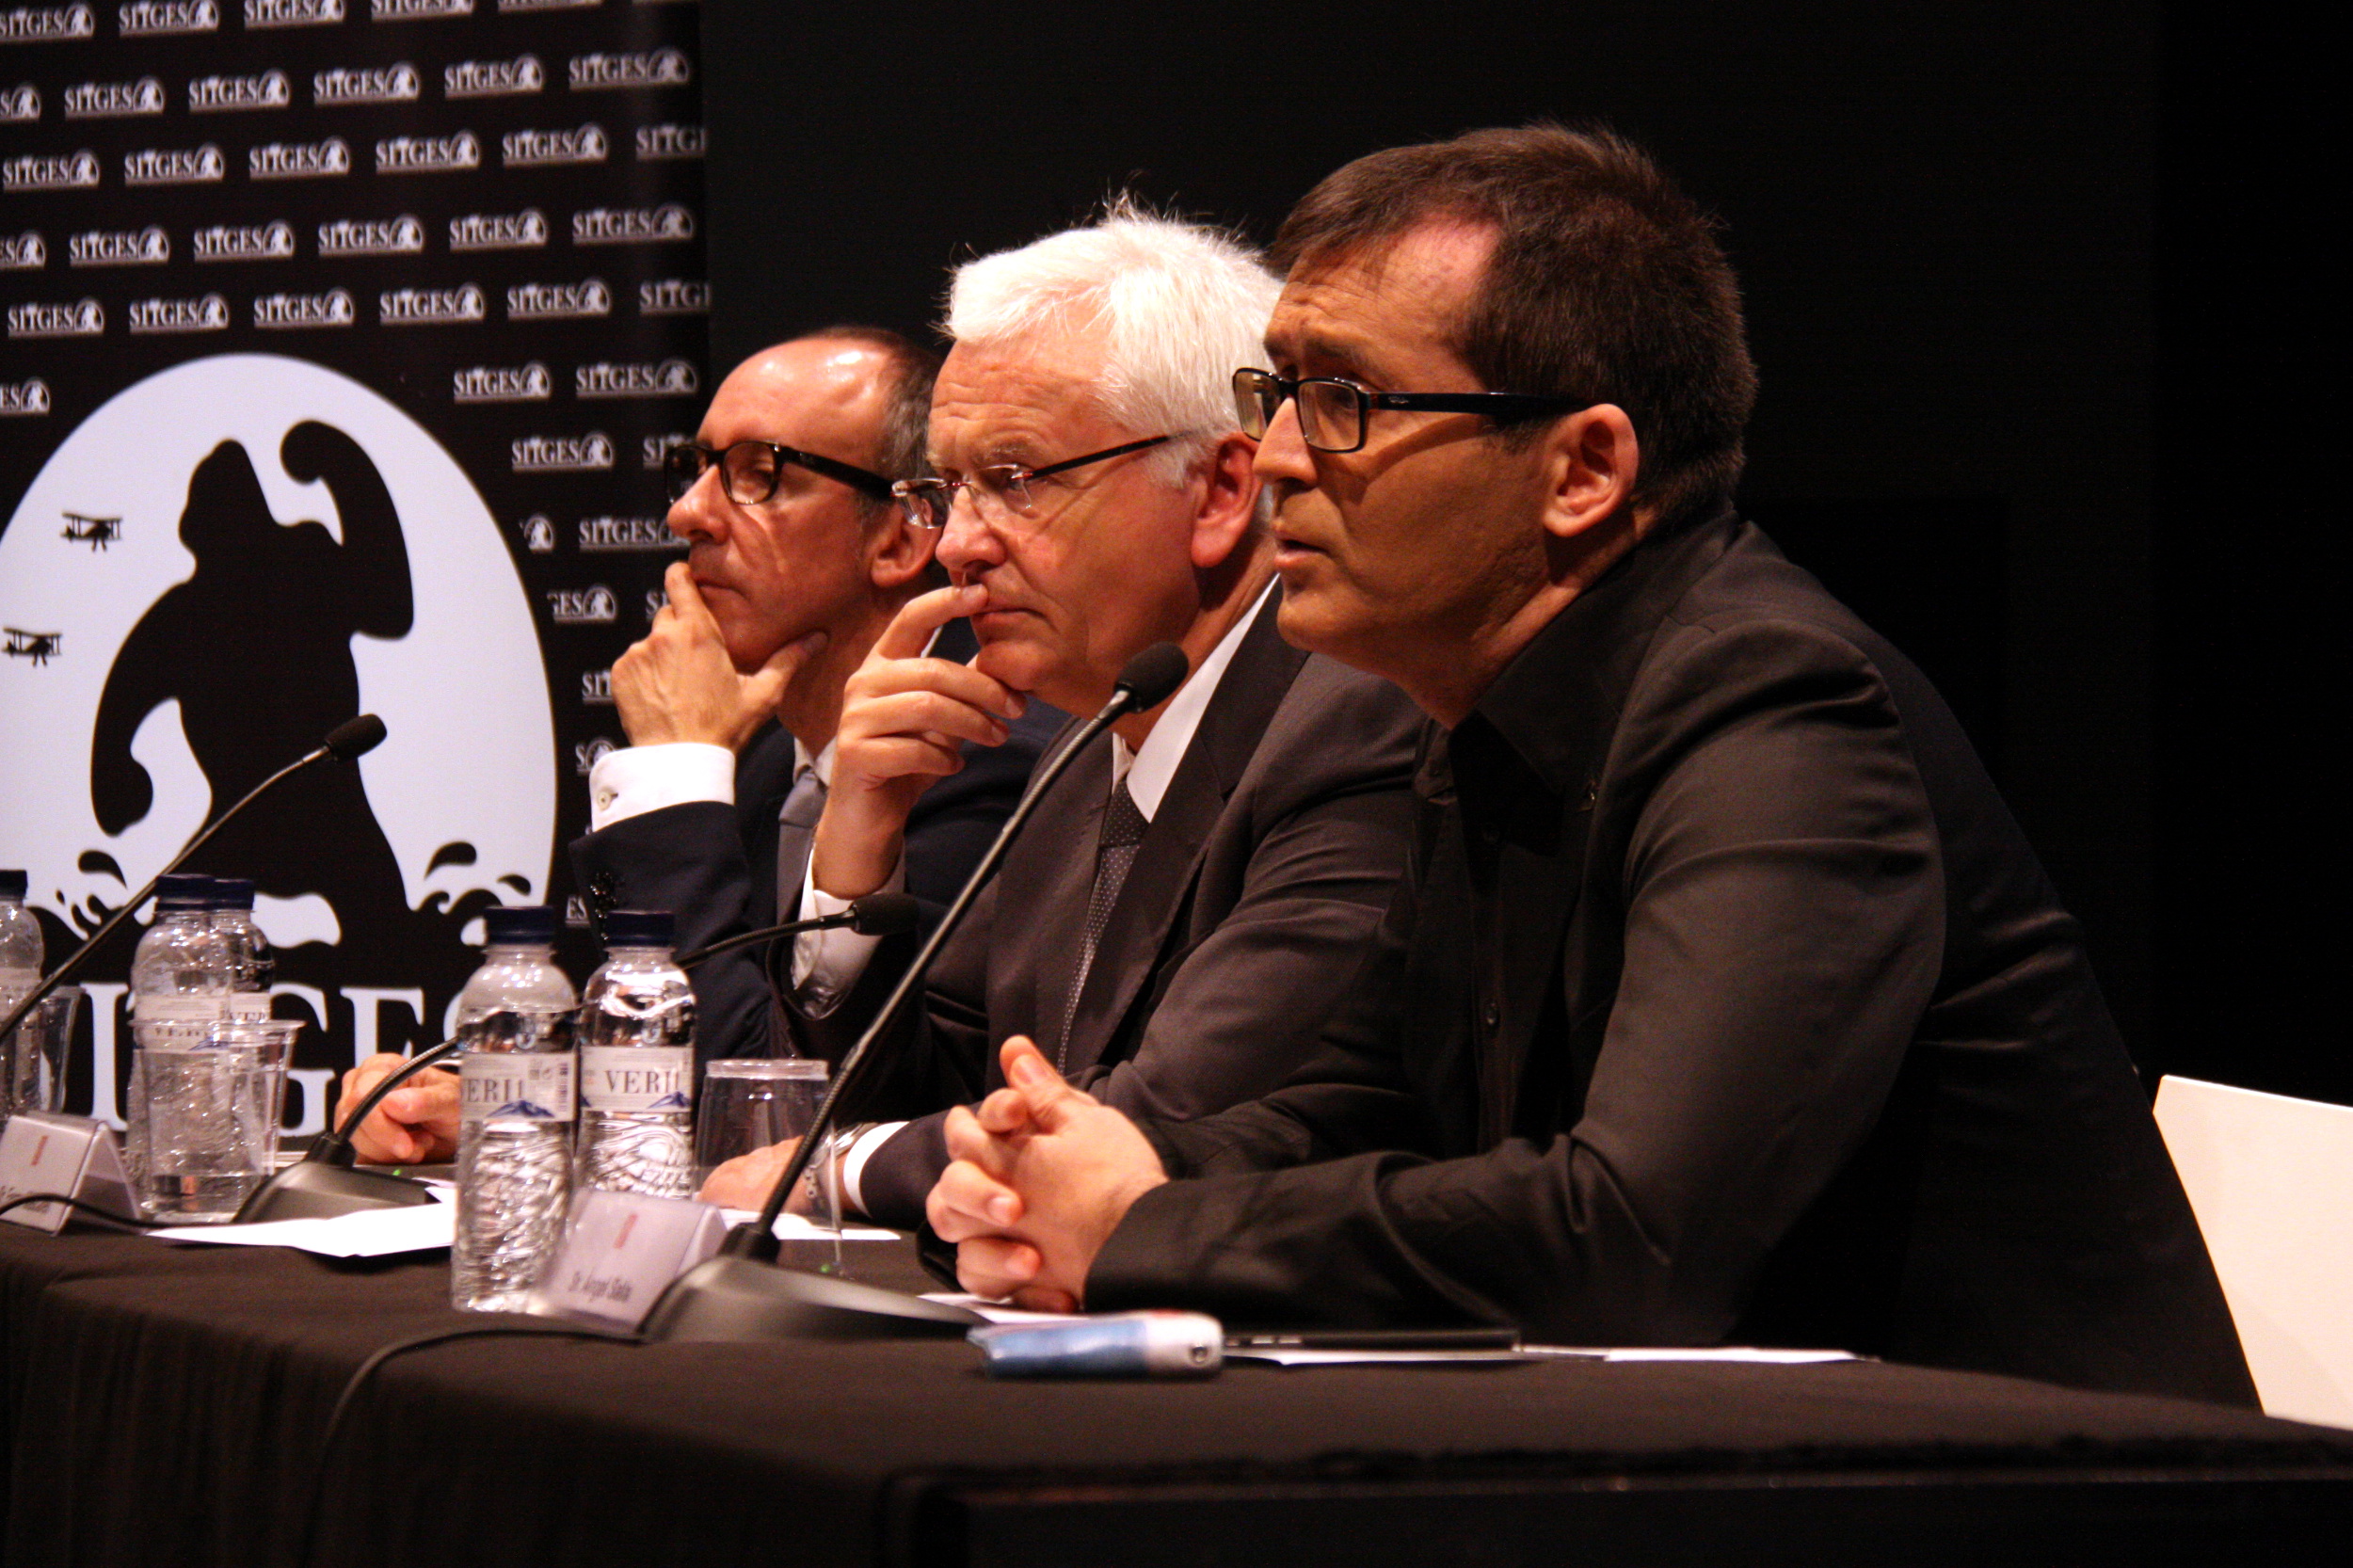 Sitges Film Festival's director, Àngel Sala, Catalan Minister for Culture, Ferran Mascarell and Sitges Mayor, Miquel Forns presenting the 48th edition of the festival